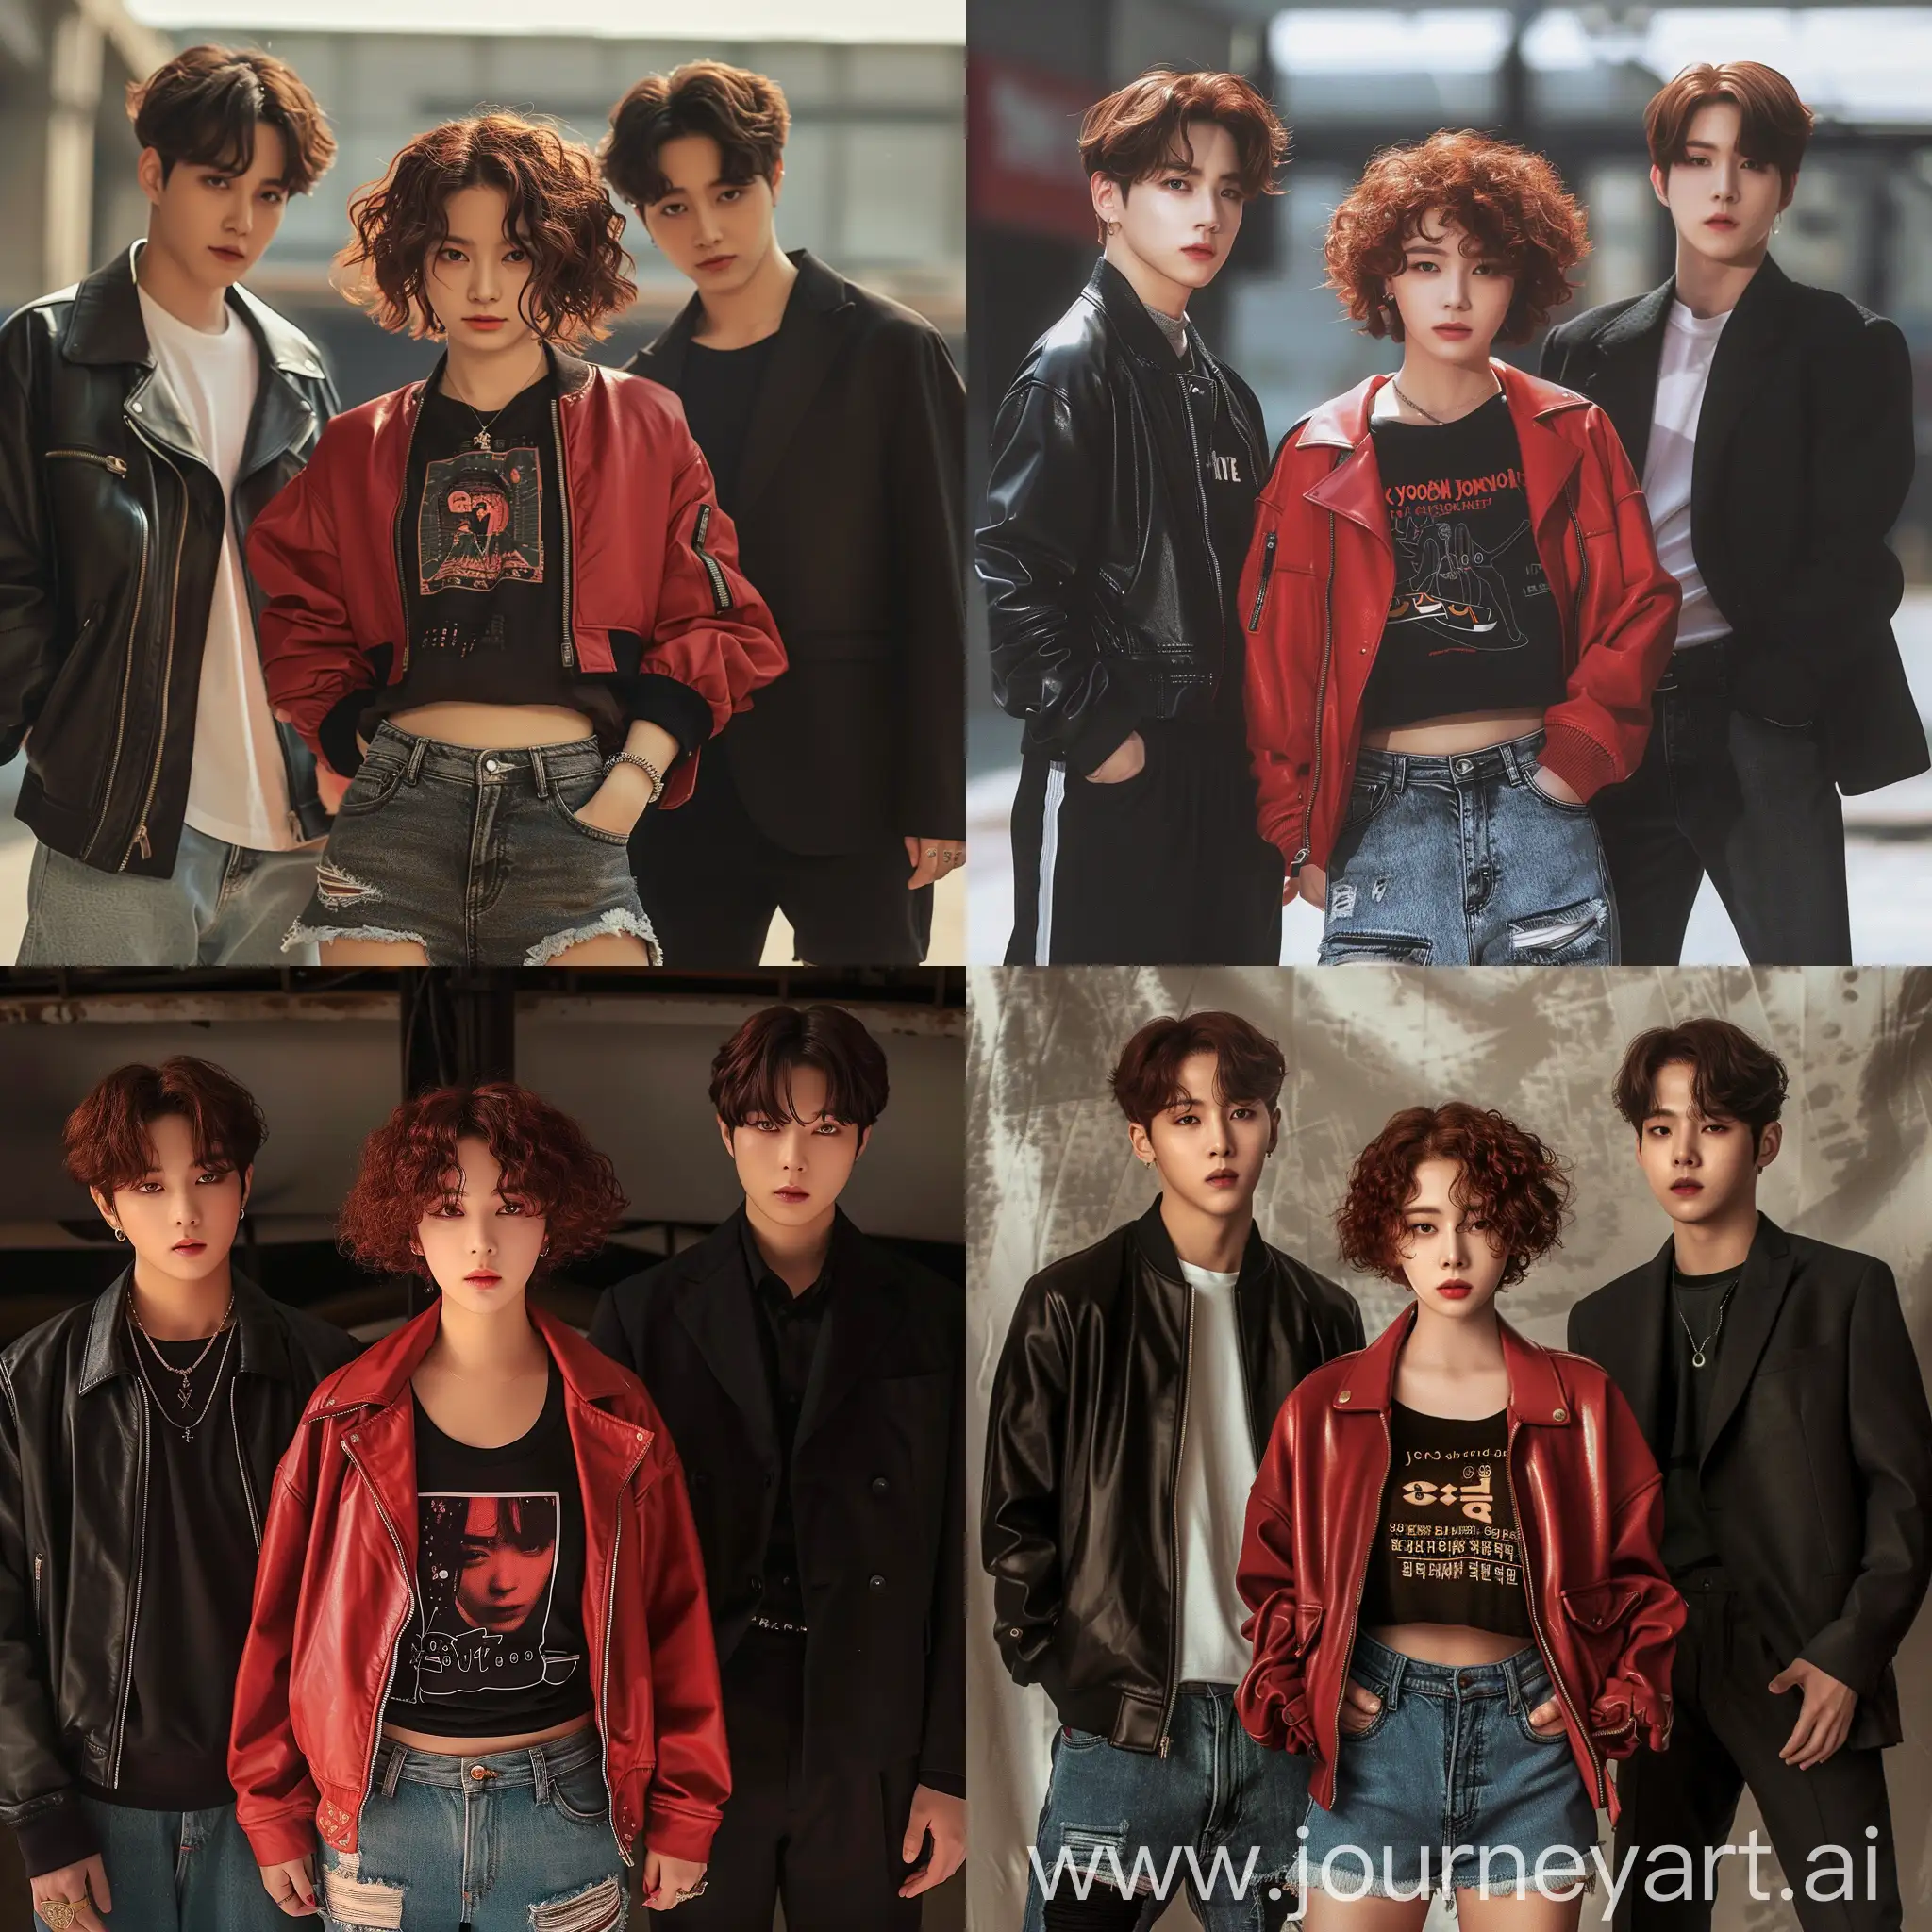 A photo of a Korean girl with short curly red-brown hair standing in the center. She is surrounded by two members of the popular K-pop band BTS, Jeon Jungkook and Min Yoongi. Jungkook stands on her left side, while Yoongi stands on her right side.


The Korean girl is wearing a stylish outfit consisting of a cropped red jacket over a black graphic t-shirt. She pairs it with high-waisted denim jeans and white sneakers. Her curly red-brown hair frames her face beautifully, and her expressive eyes shine with excitement. She has a warm and friendly smile, which adds to her charm.


Jungkook, on the left side of the image, is wearing a black leather jacket over a white t-shirt. He pairs it with ripped jeans and black boots. His dark brown hair is styled in a trendy manner, and his sharp facial features accentuate his handsome appearance. He gazes at the girl with admiration, his expression hinting at a sweet and endearing emotion.


Yoongi, on the right side of the image, is dressed in a comfortable yet fashionable attire. He wears a black suit. Yoongi looks at the girl with a gentle and serene expression, his aura radiating calmness and attentiveness.


The image captures the trio in a harmonious moment, with the girl at the center, surrounded by Jungkook and Yoongi. The realistic style of the image emphasizes the details and textures, bringing the characters to life.